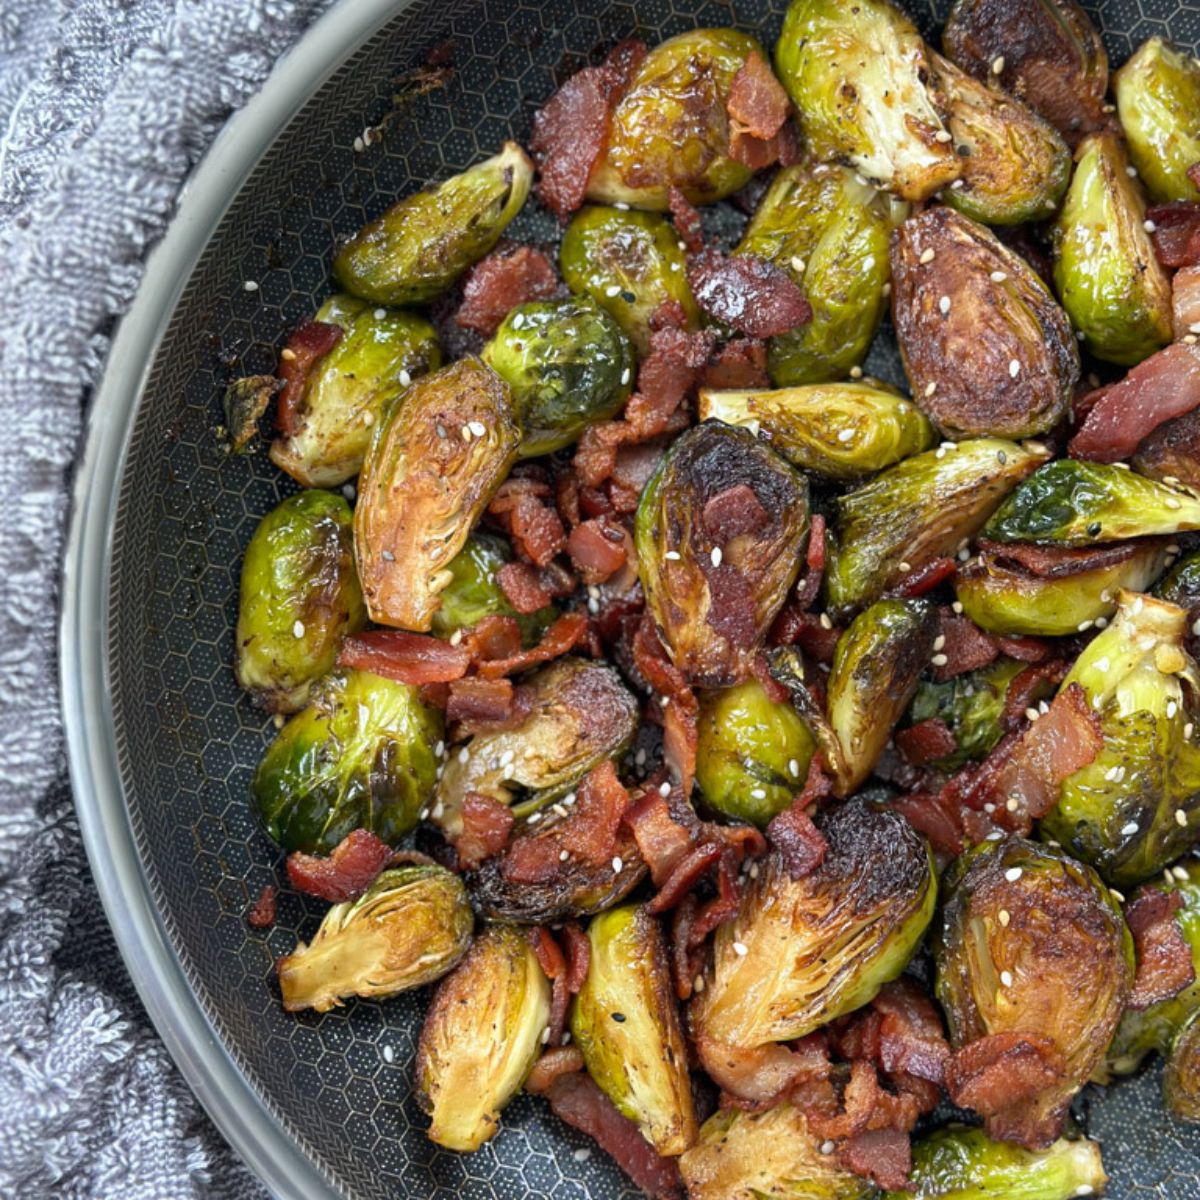 Brussel Sprouts with Bacon and Balsamic Glaze